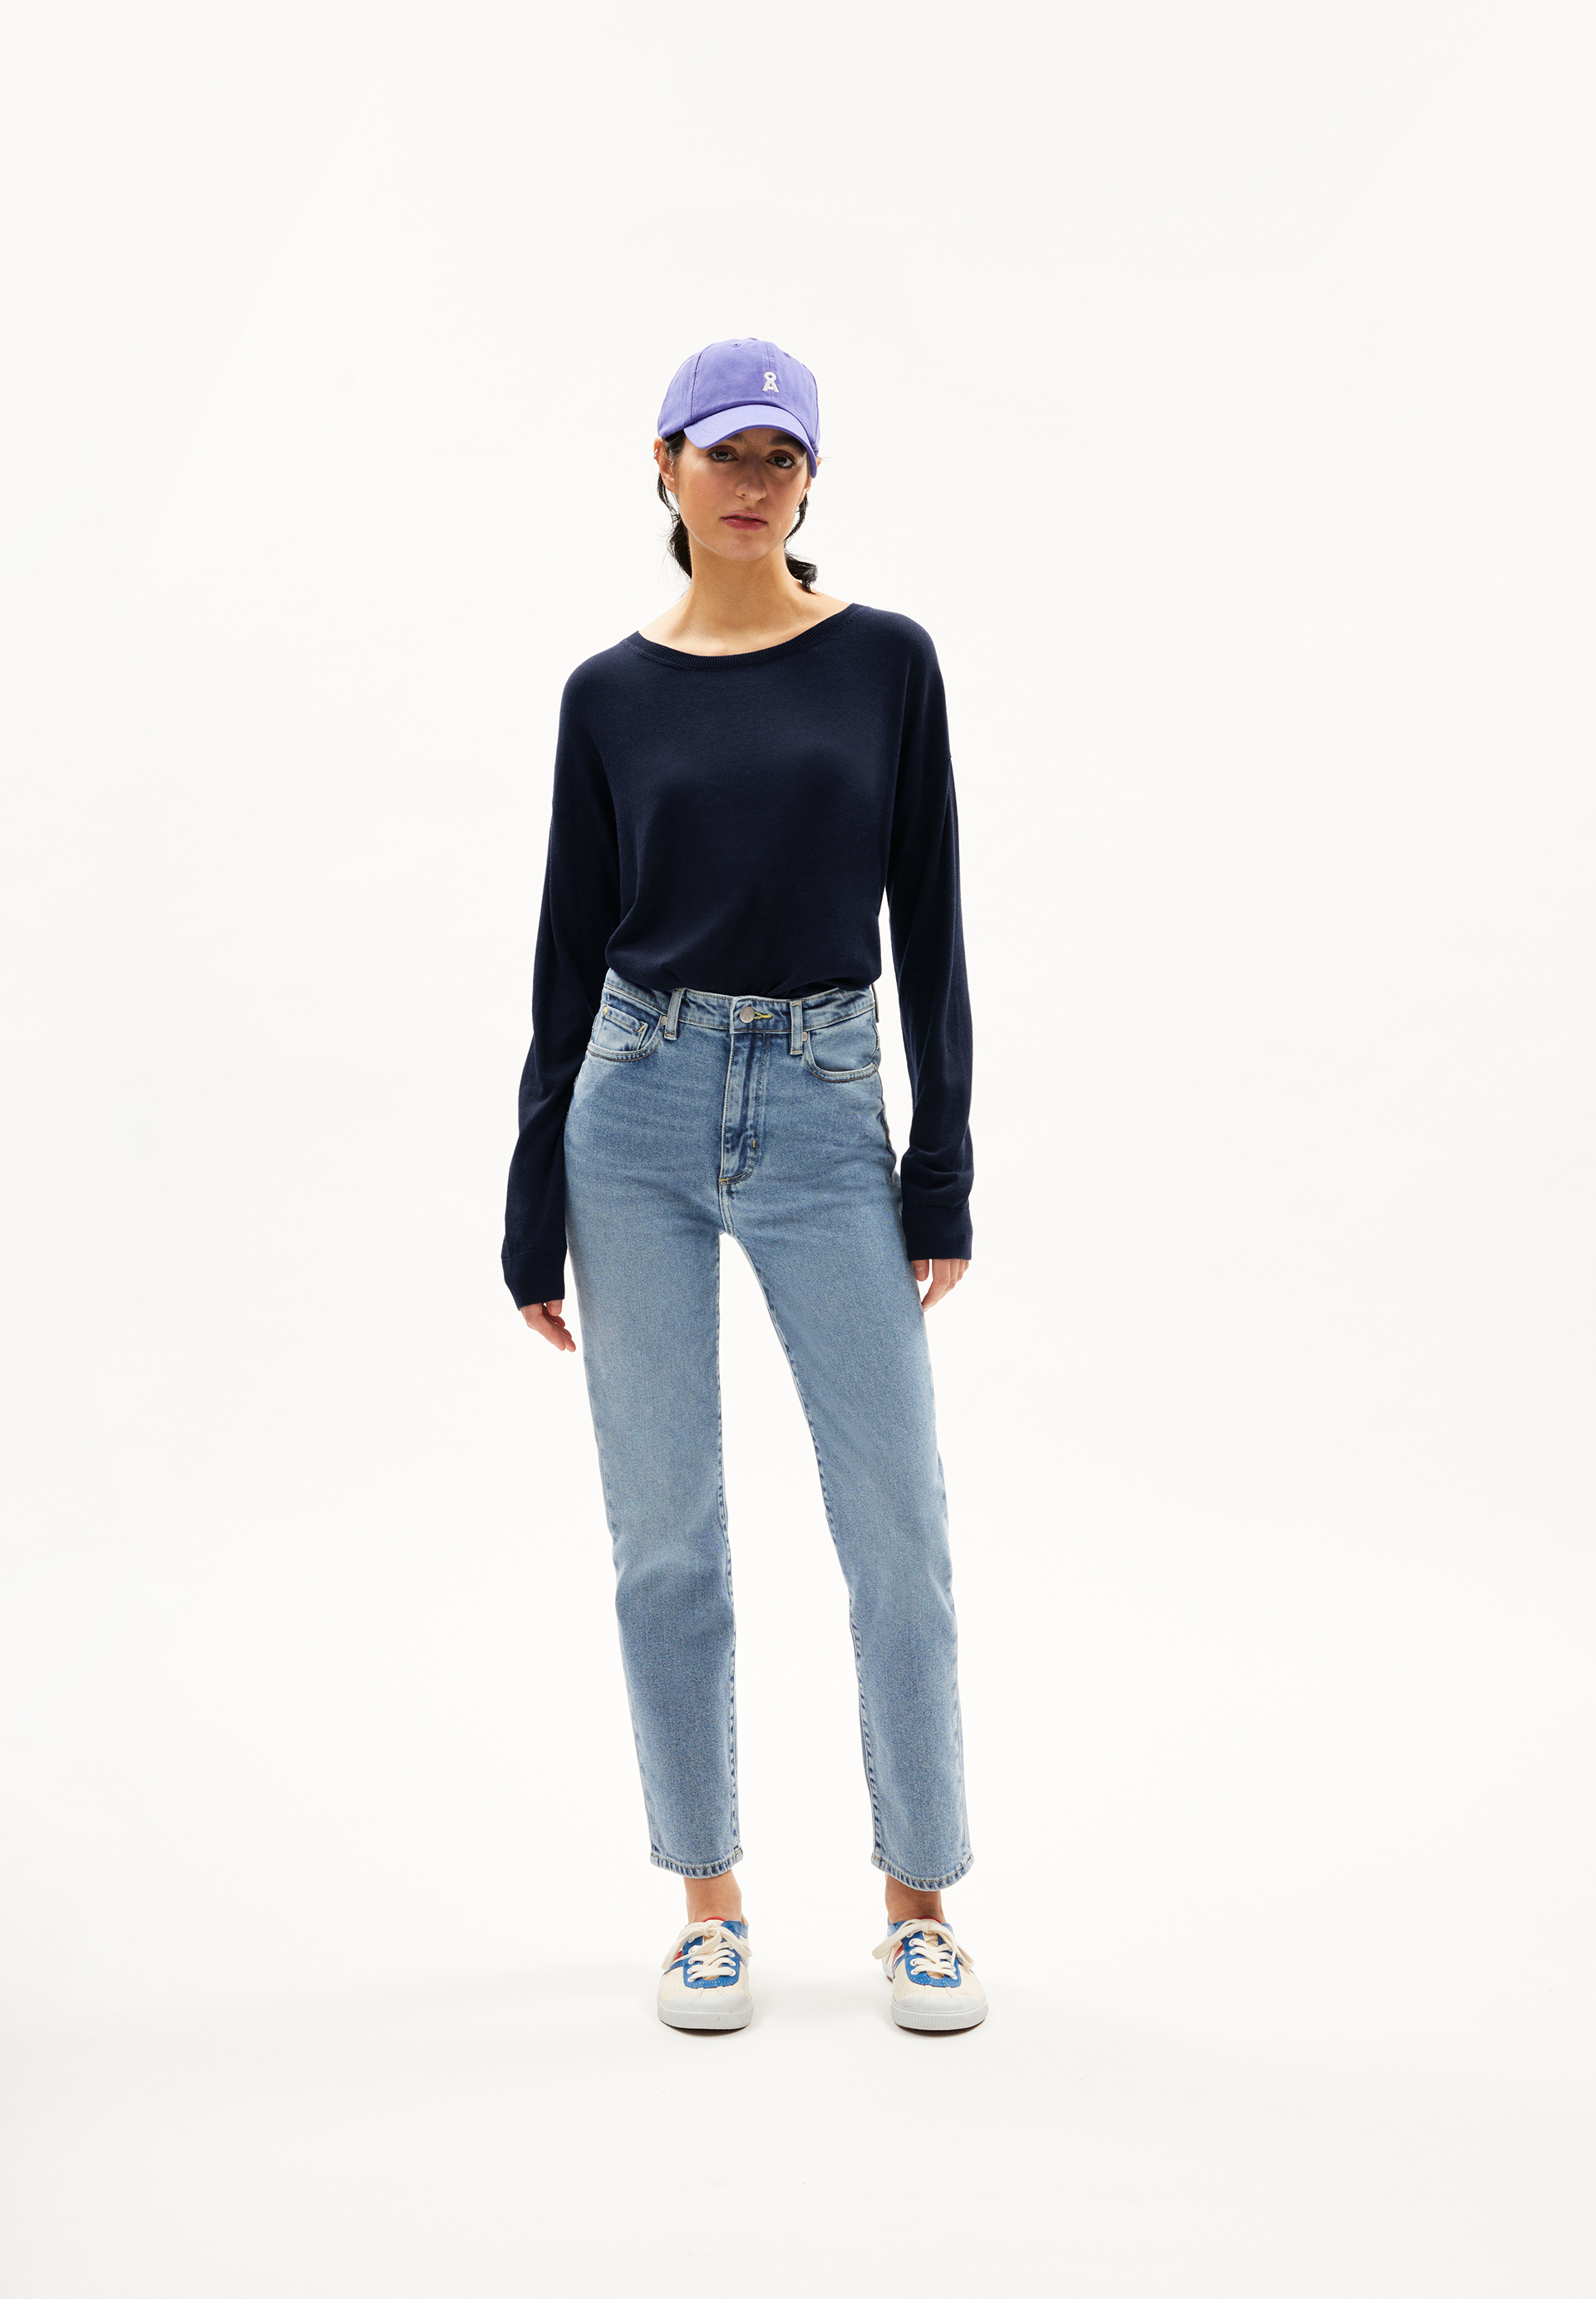 LAARNI Pullover Relaxed Fit aus TENCEL™ Lyocell Mix